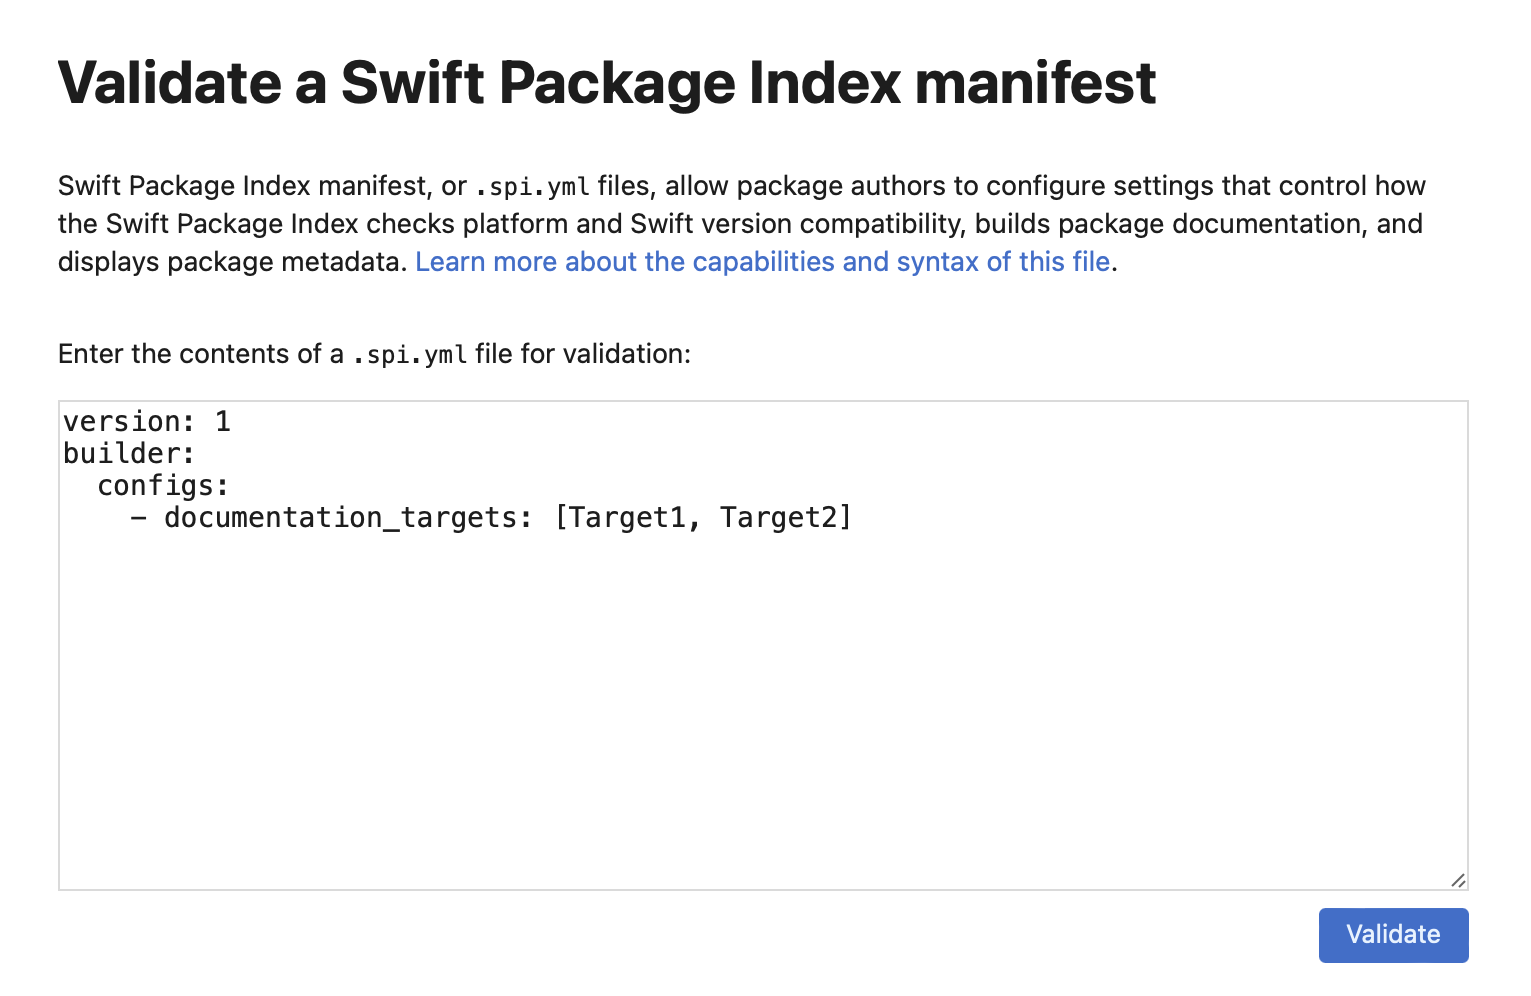 The Swift Package Index manifest validation page.